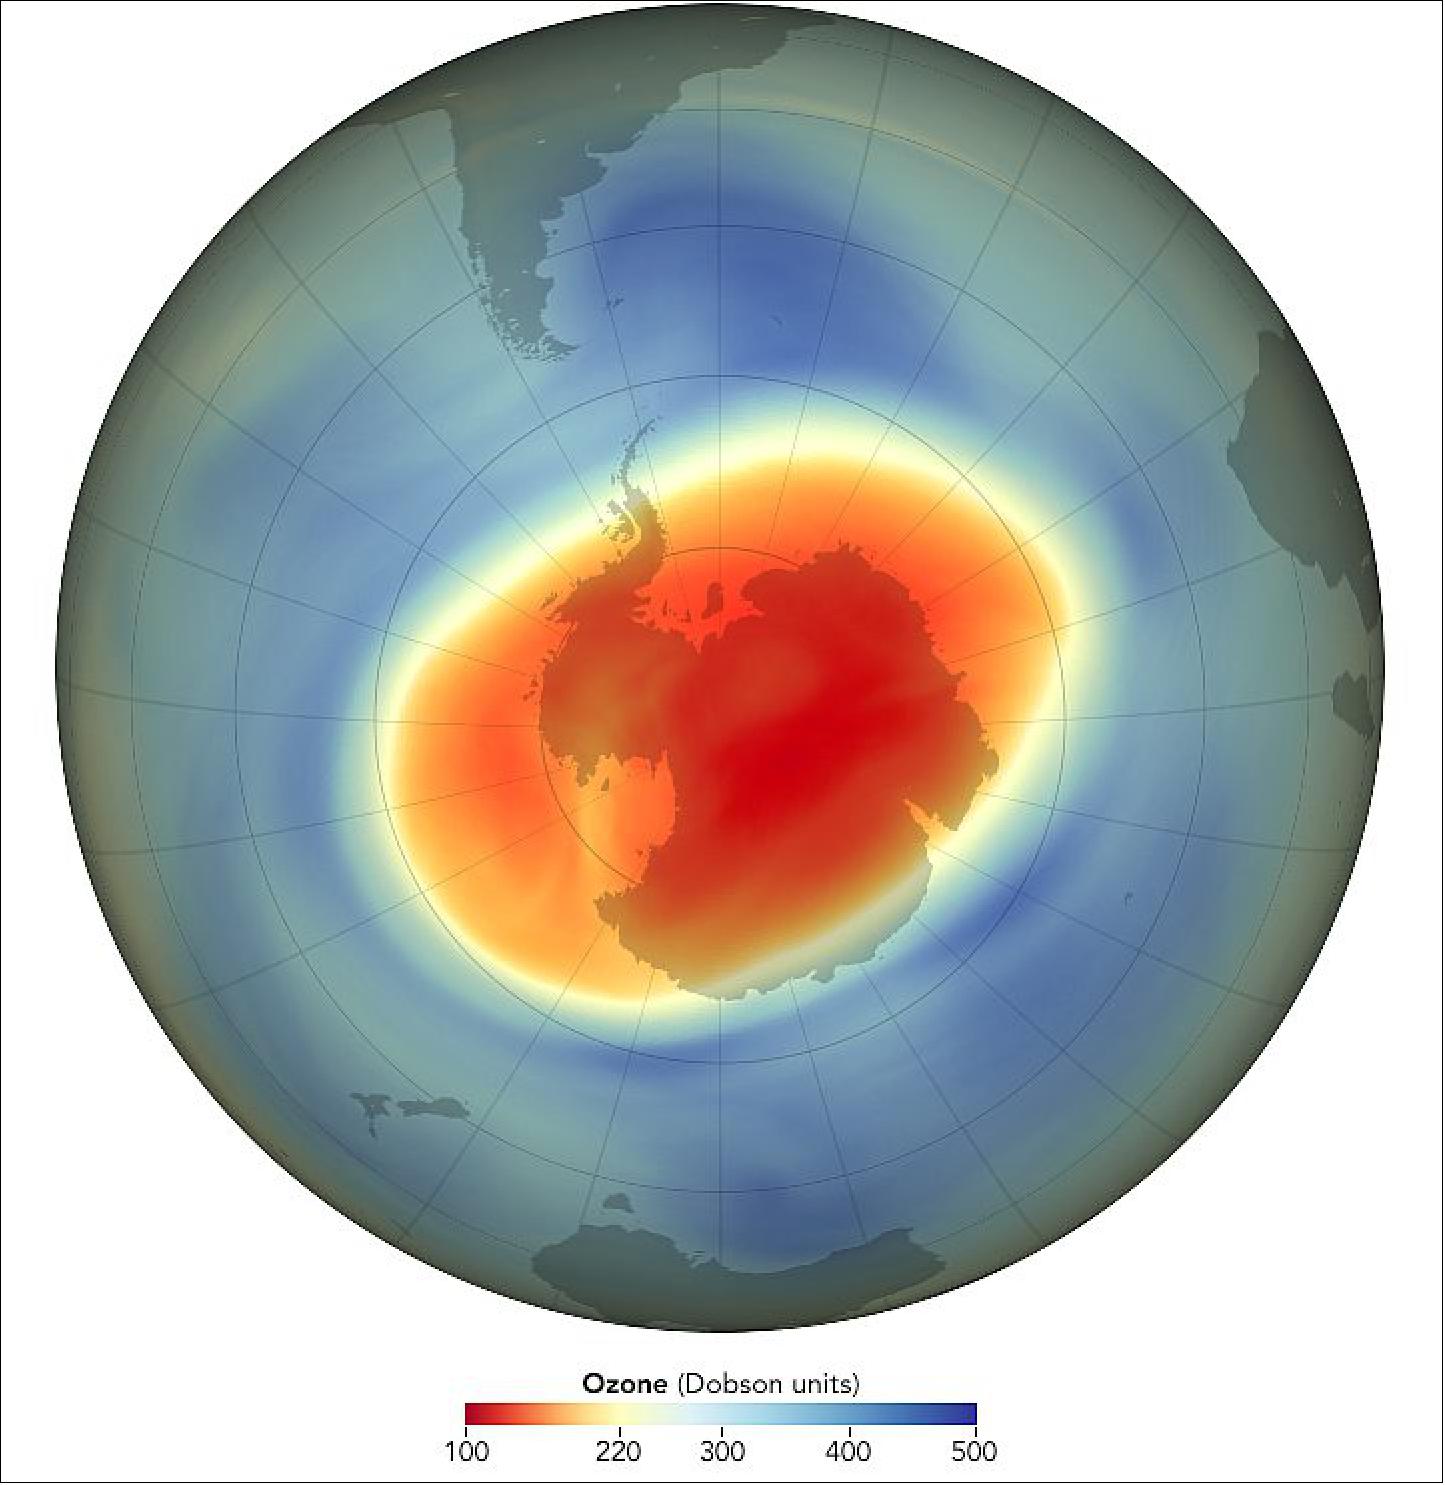 Figure 6: The map shows the size and shape of the ozone hole over the South Pole on September 20, the day of its maximum as calculated by the NASA Ozone Watch team. NASA and NOAA monitor the ozone hole via complementary instrumental methods. NASA’s Aura satellite, the NASA-NOAA Suomi NPP satellite, and NOAA’s JPSS NOAA-20 satellite all measure ozone from space. Aura’s Microwave Limb Sounder also estimates levels of ozone-destroying chlorine (image credit: NASA Earth Observatory image by Joshua Stevens, using data courtesy of NASA Ozone Watch and GEOS-5 data from the Global Modeling and Assimilation Office at NASA GSFC. Story by Theo Stein, NOAA, and Ellen Gray, NASA Earth Science News Team, with EO Staff)